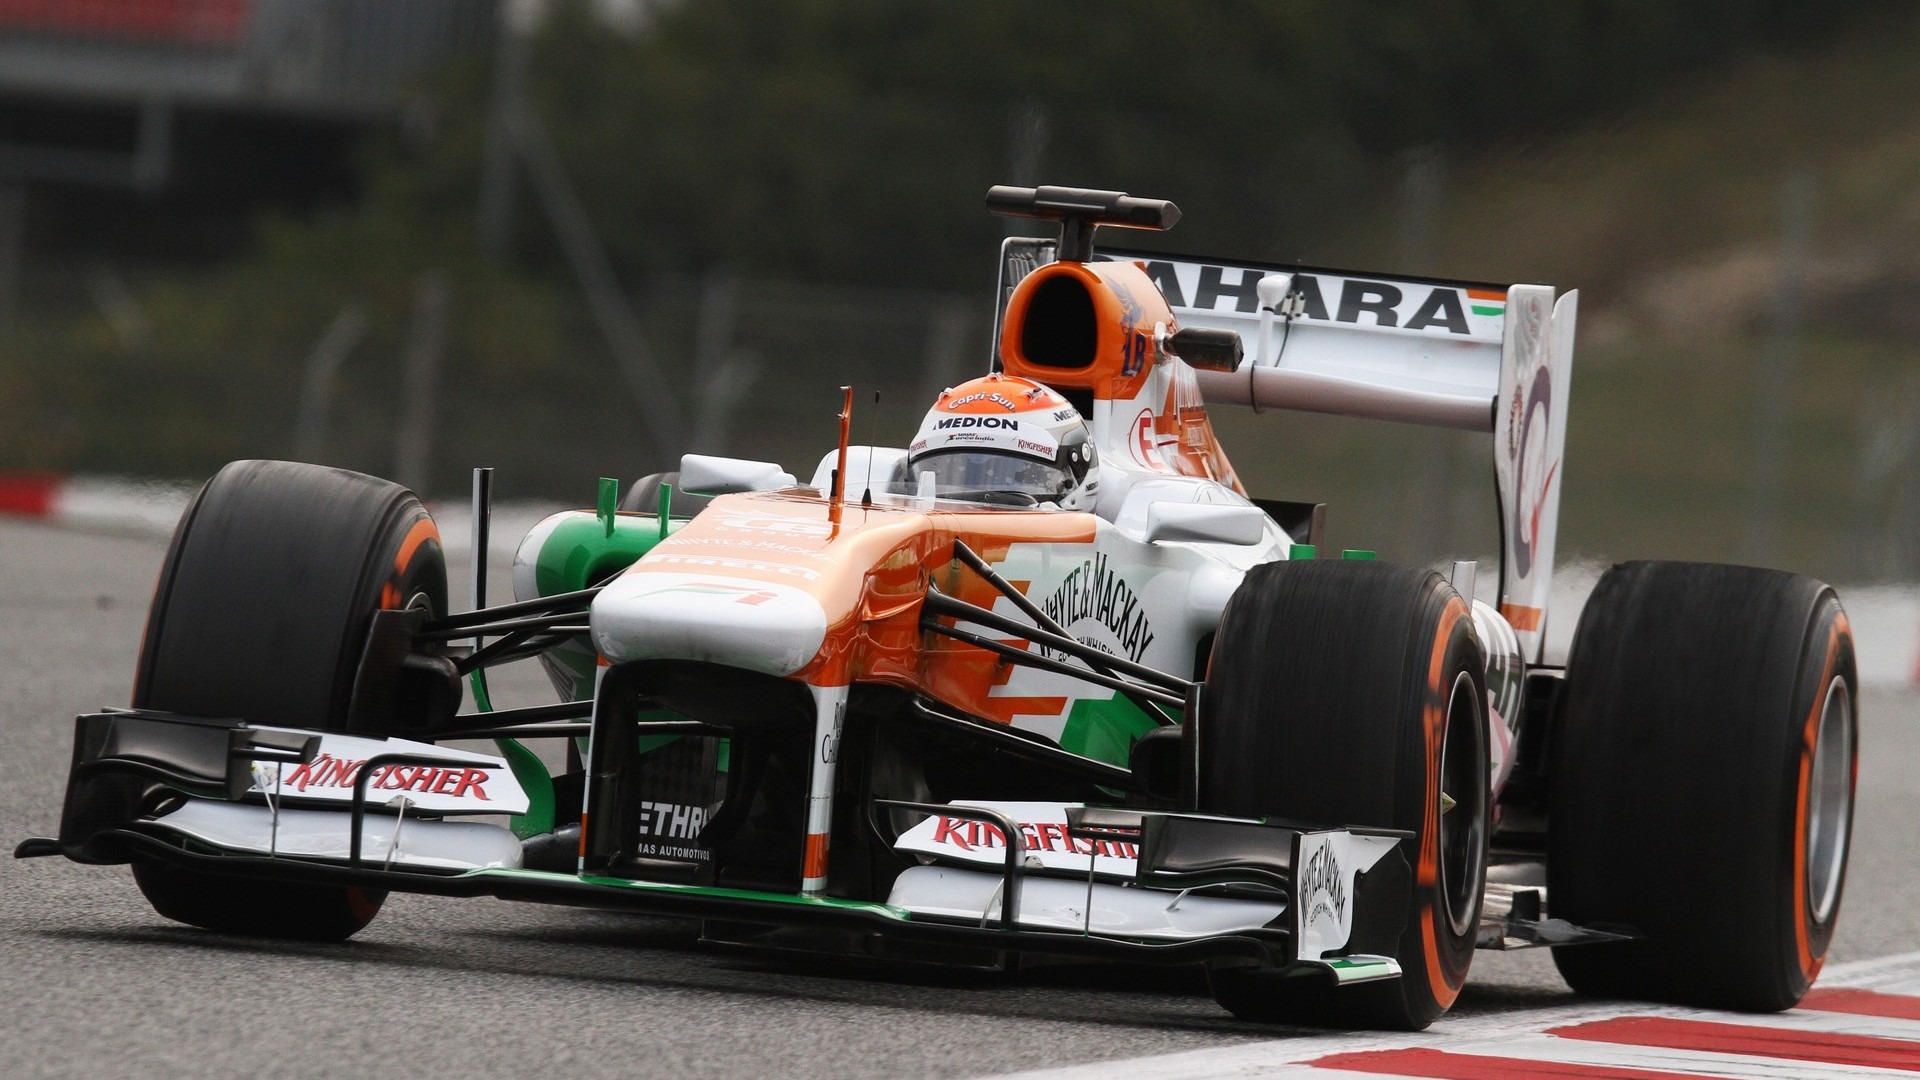 Force India Vjm06 Wallpapers